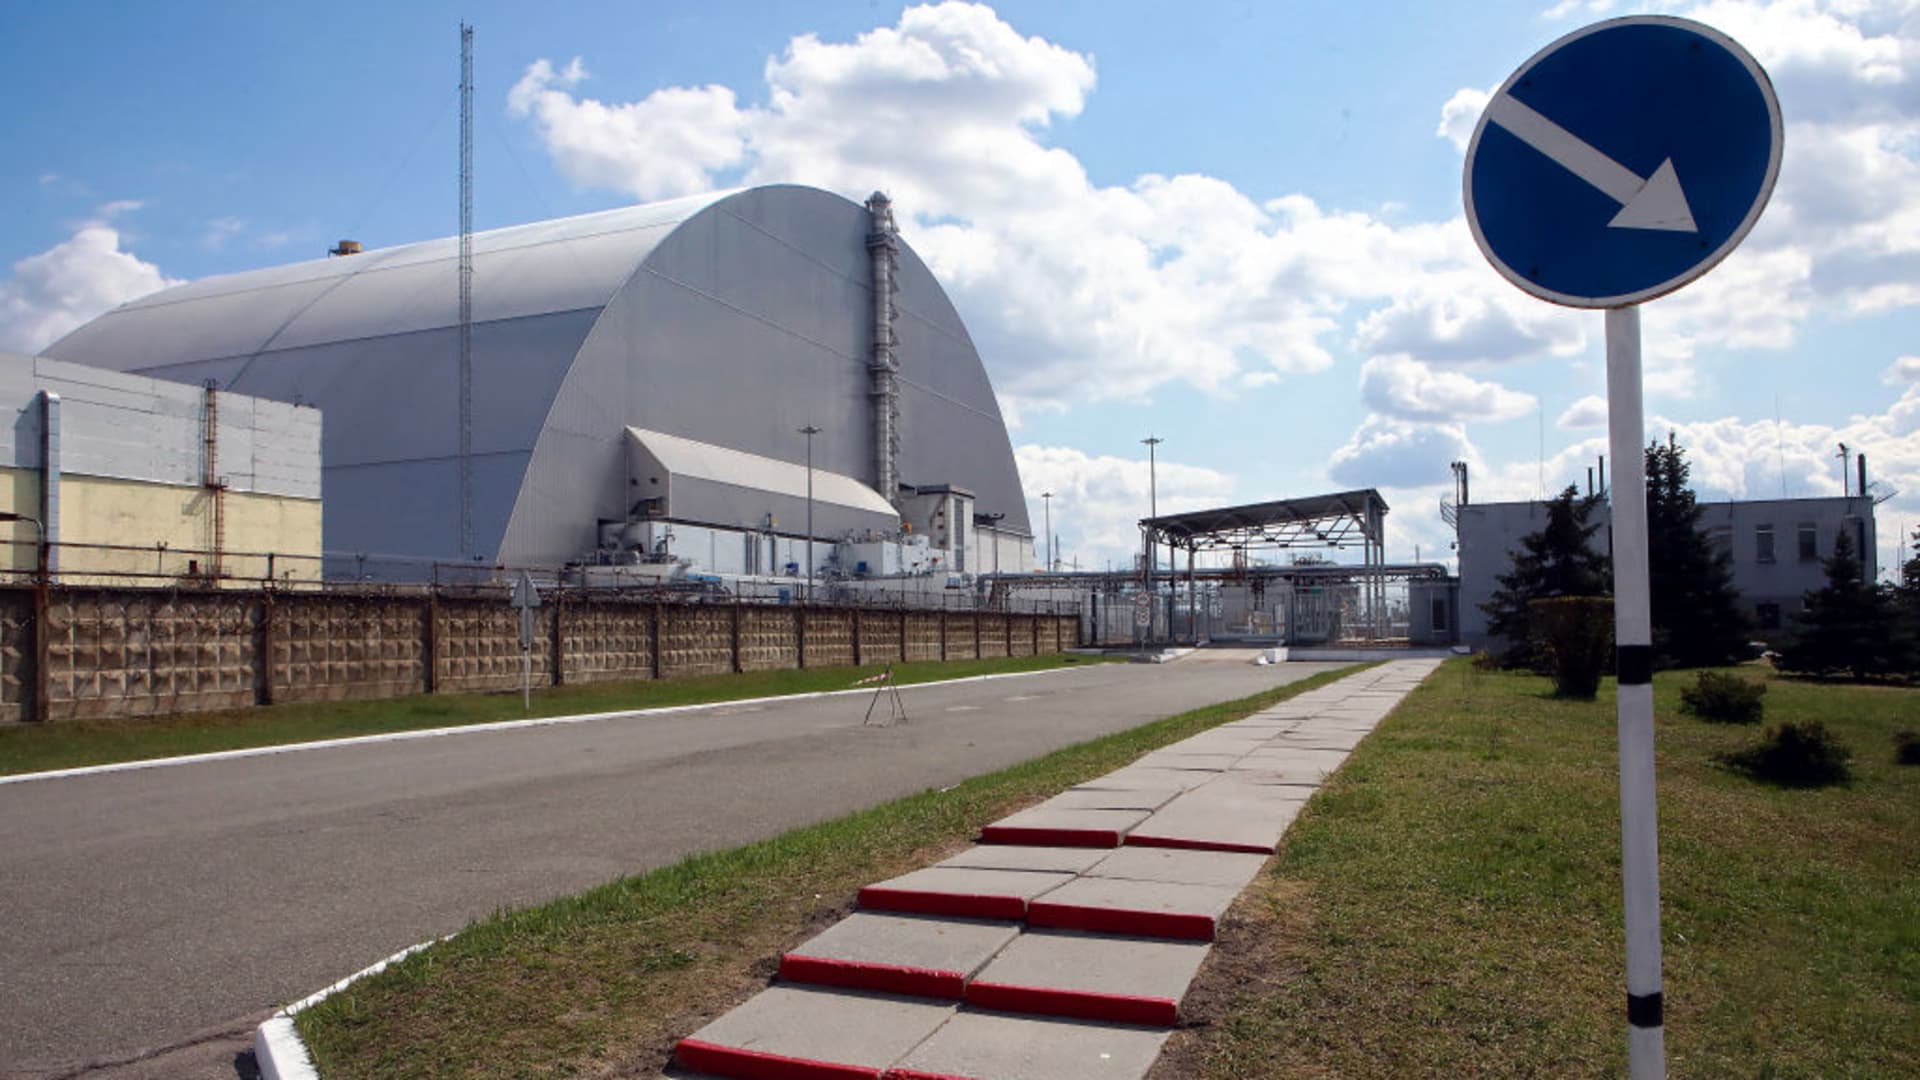 The New Safe Confinement seals off the Object Shelter, also known as the Sarcophagus, a temporary structure built in 1986 over the debris of the 4th reactor of the Chornobyl Nuclear Power Plant, Kyiv Region, northern Ukraine.